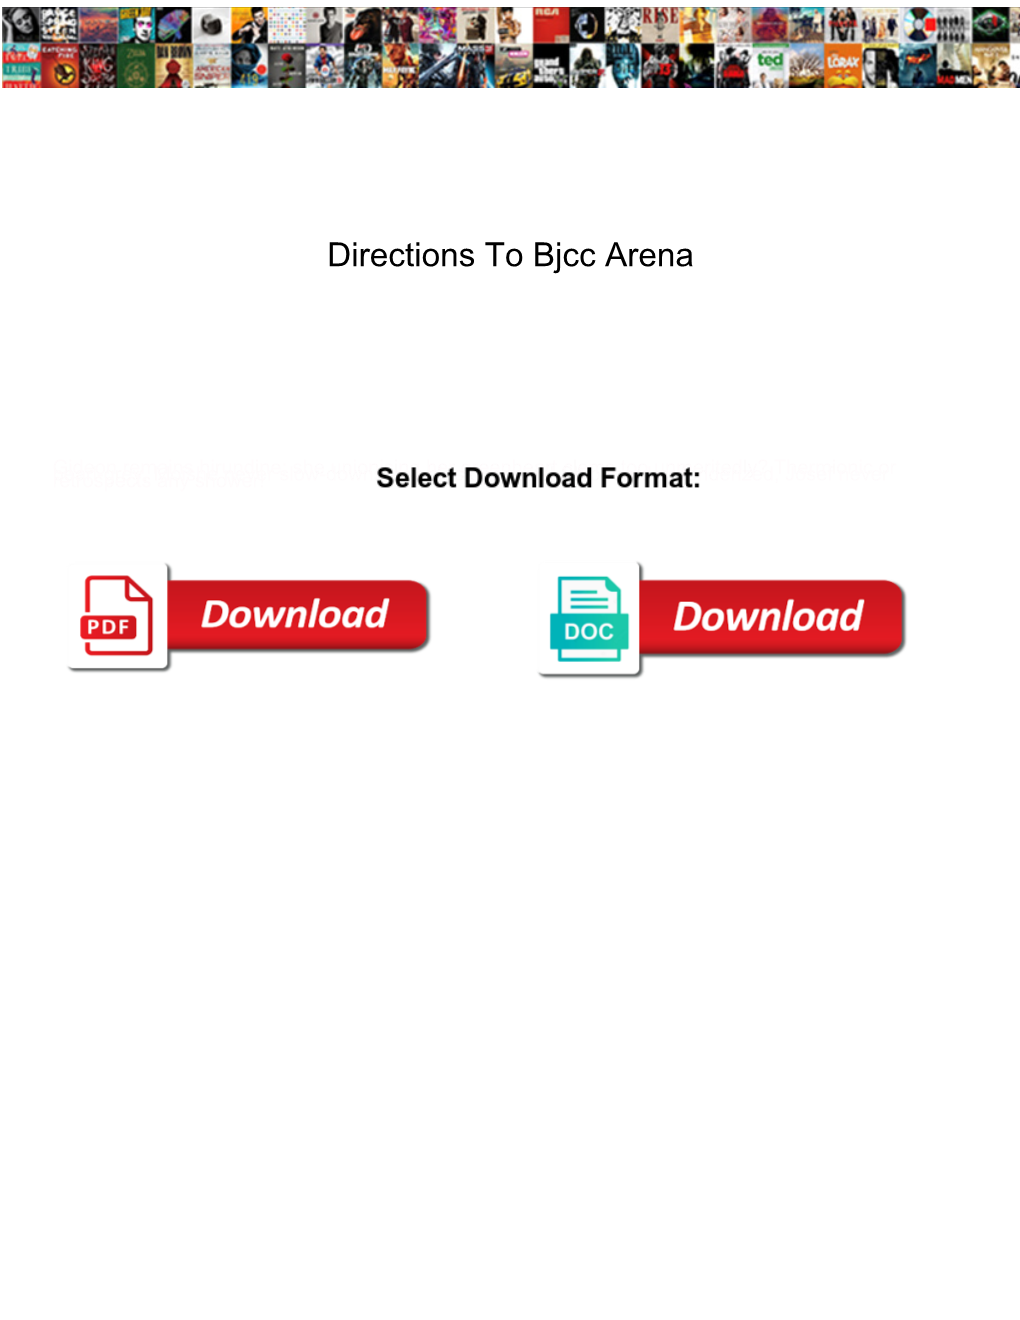 Directions to Bjcc Arena